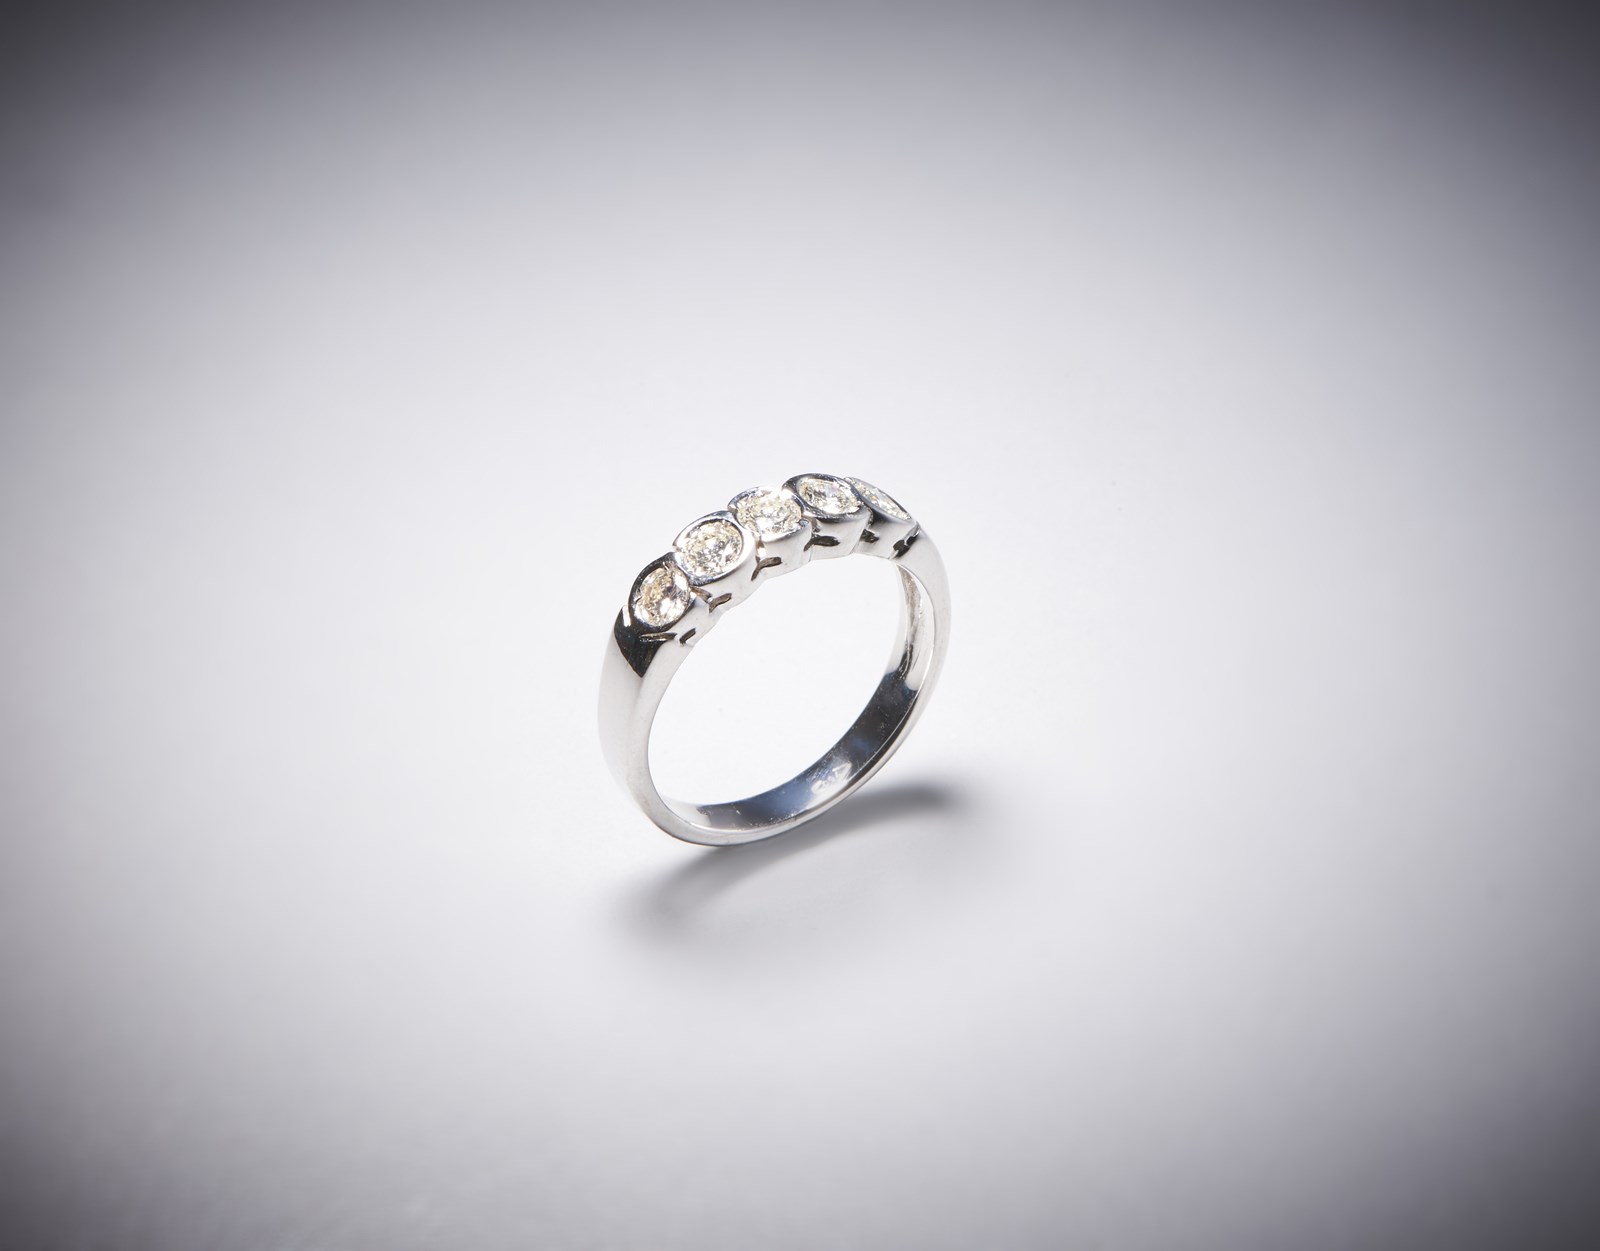 Ring with five stones in white gold 750/1000 type for 1,00 carats total approximately. (. )